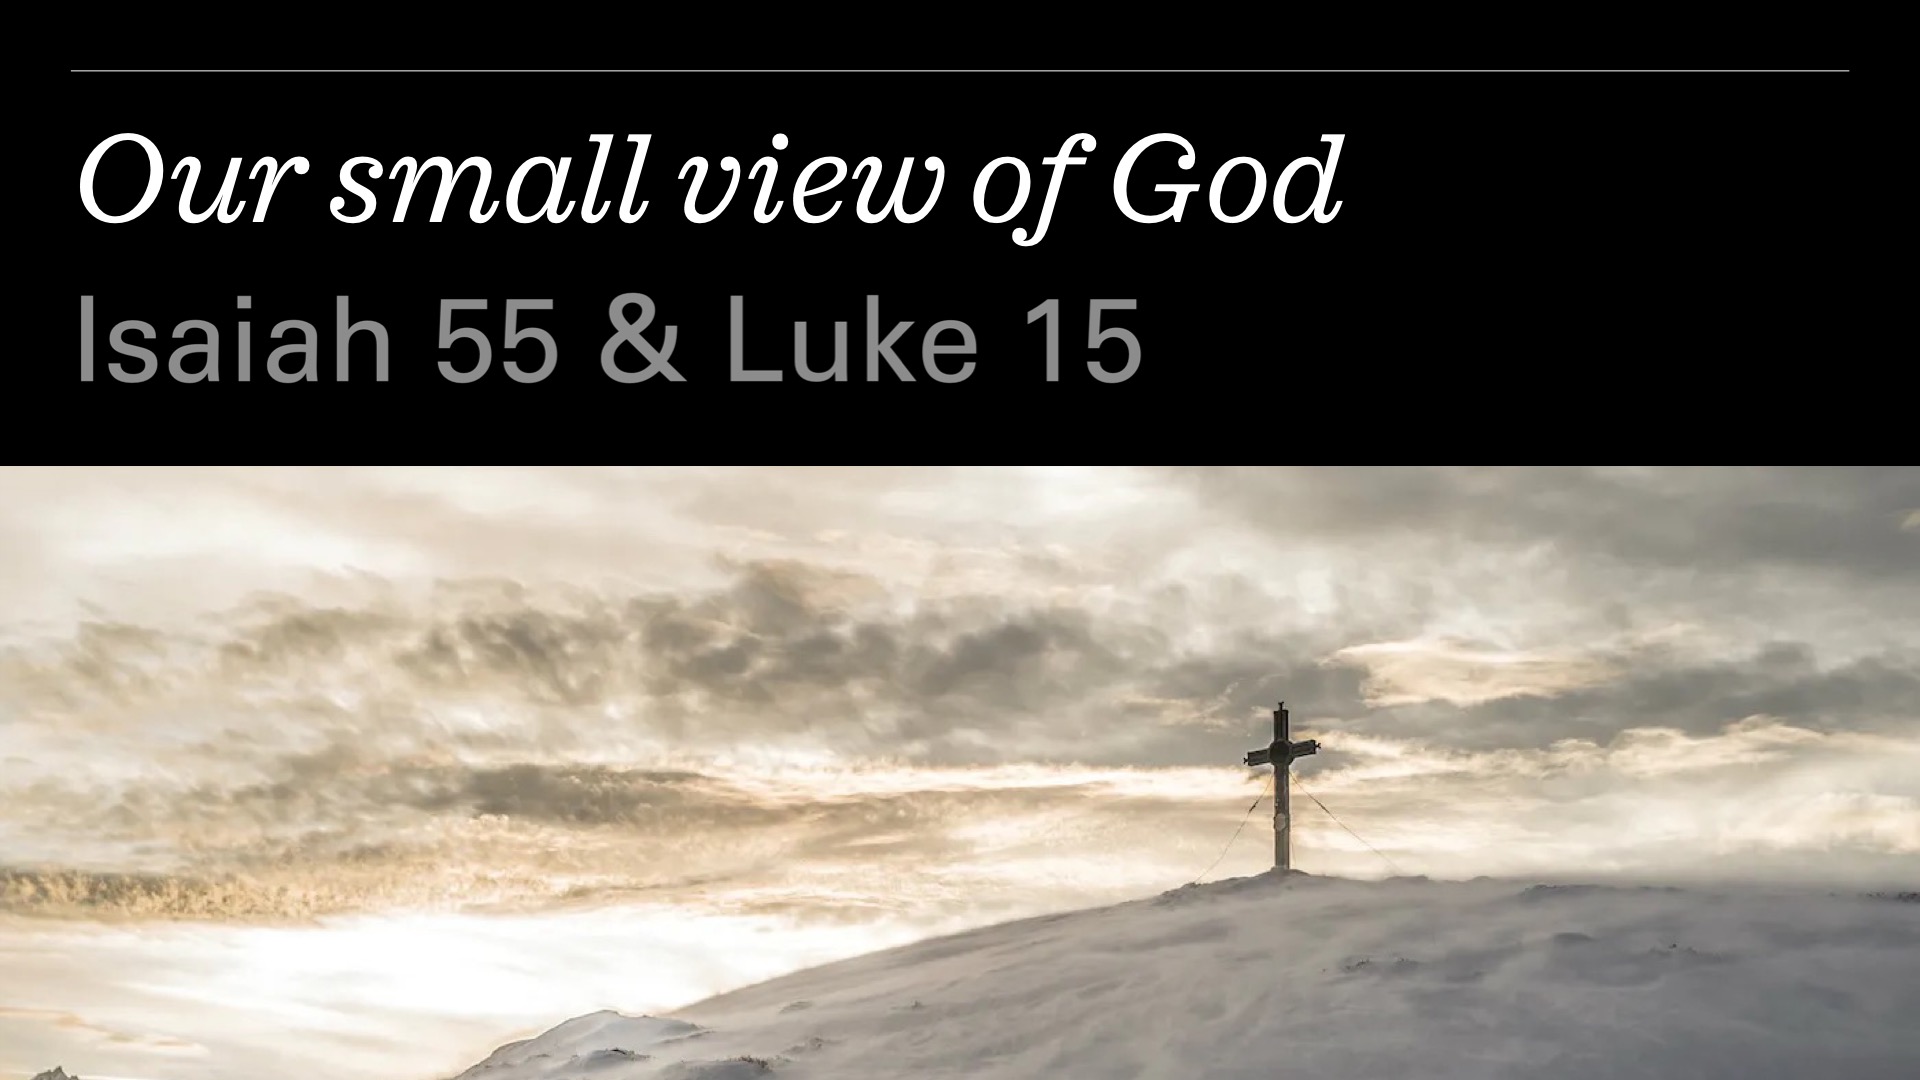 Our small view of God